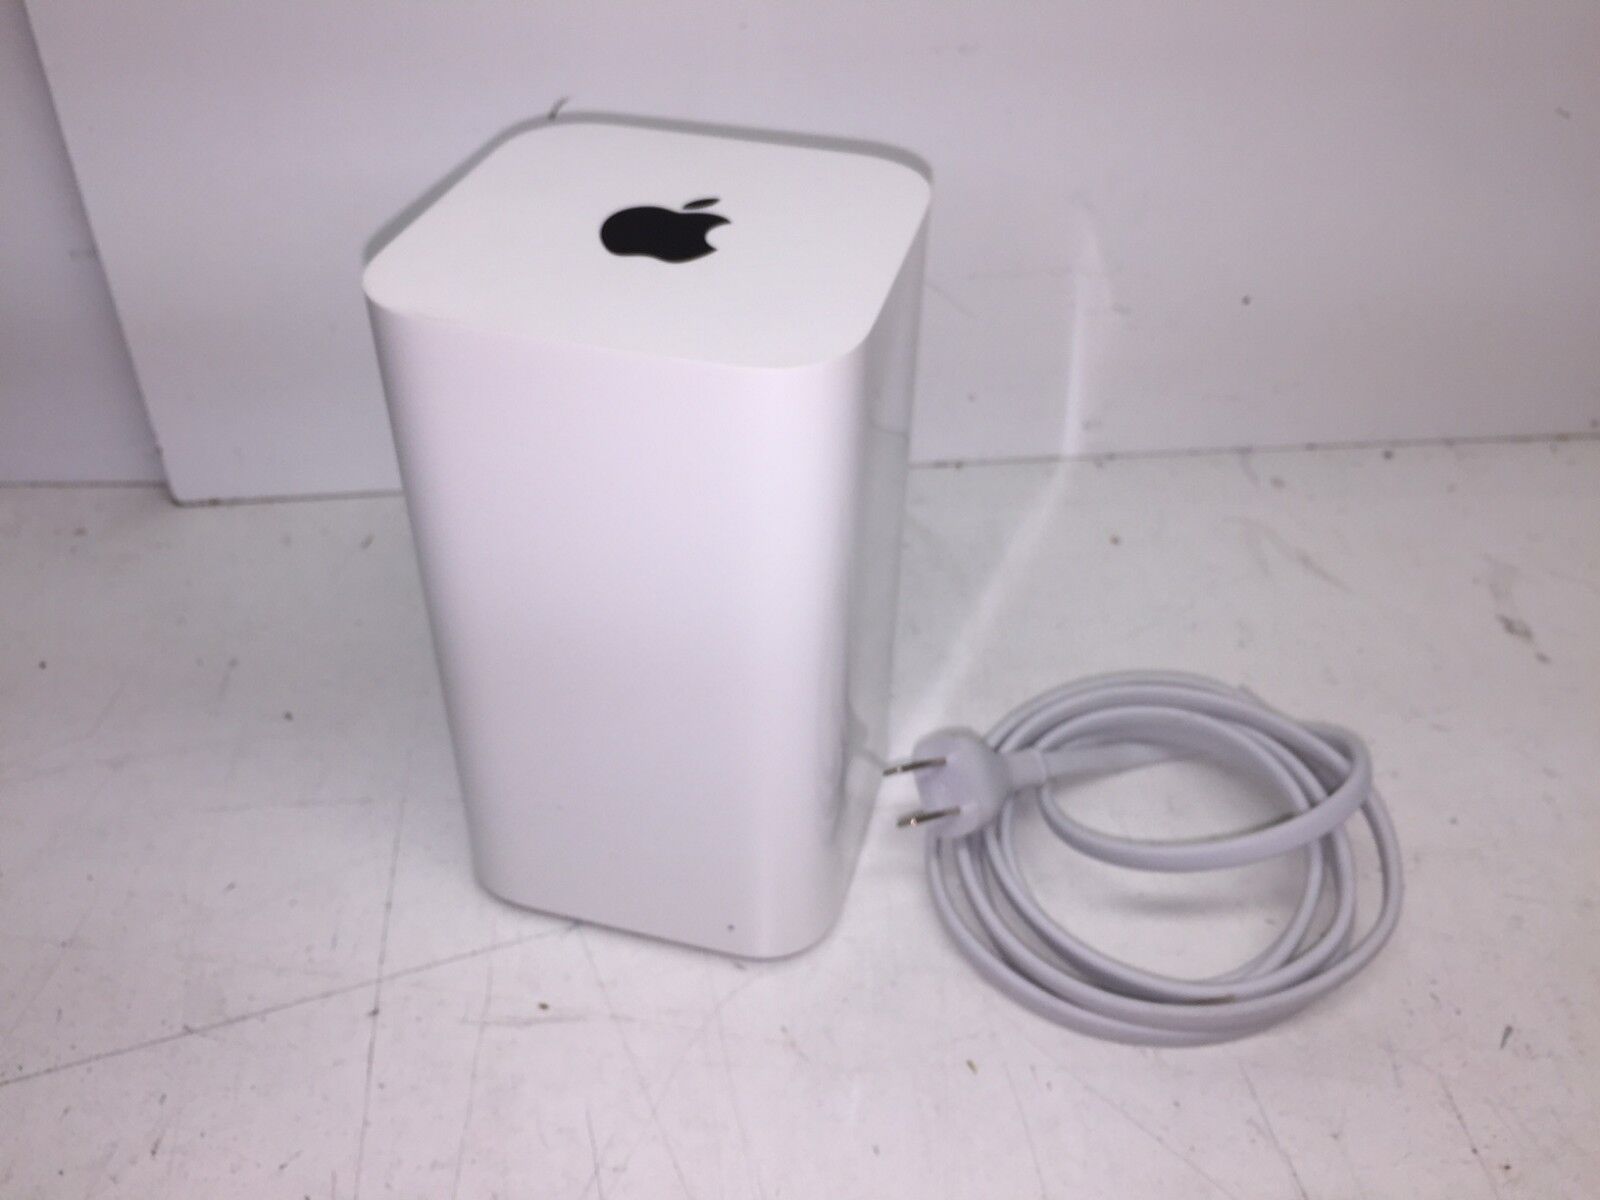 Apple Airport Time Capsule Model A1470 3TB Hard Drive WiFi w/Power Cord TESTED